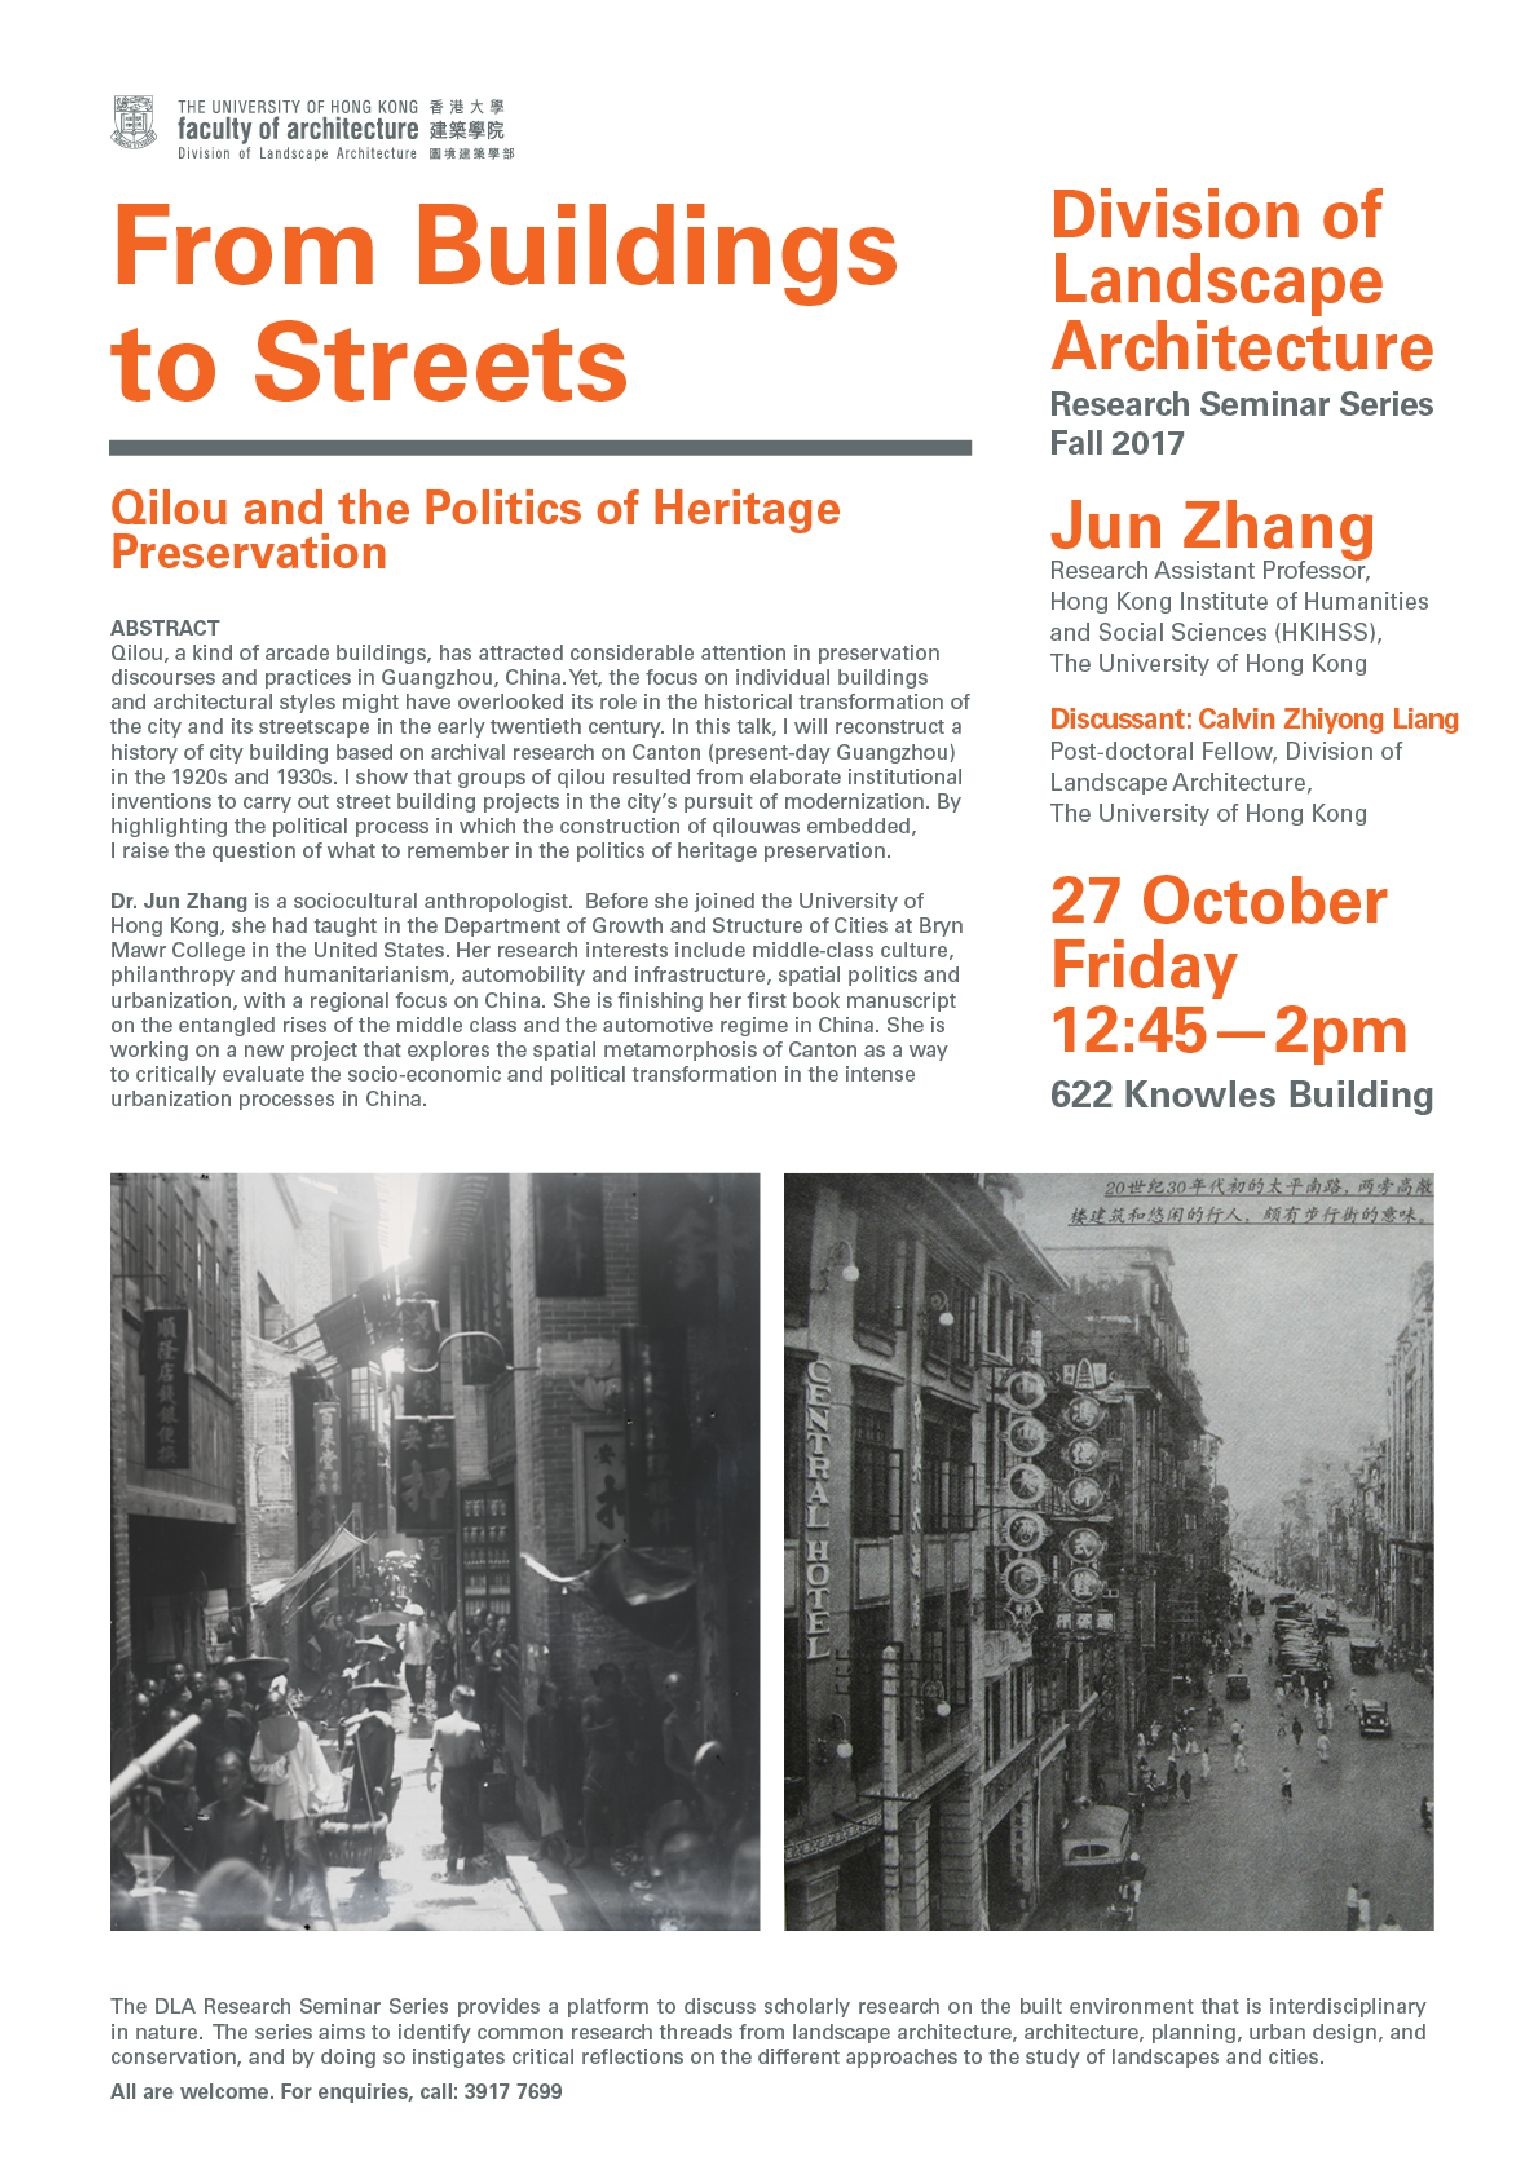 DLA Research Seminar - From Buildings to Streets